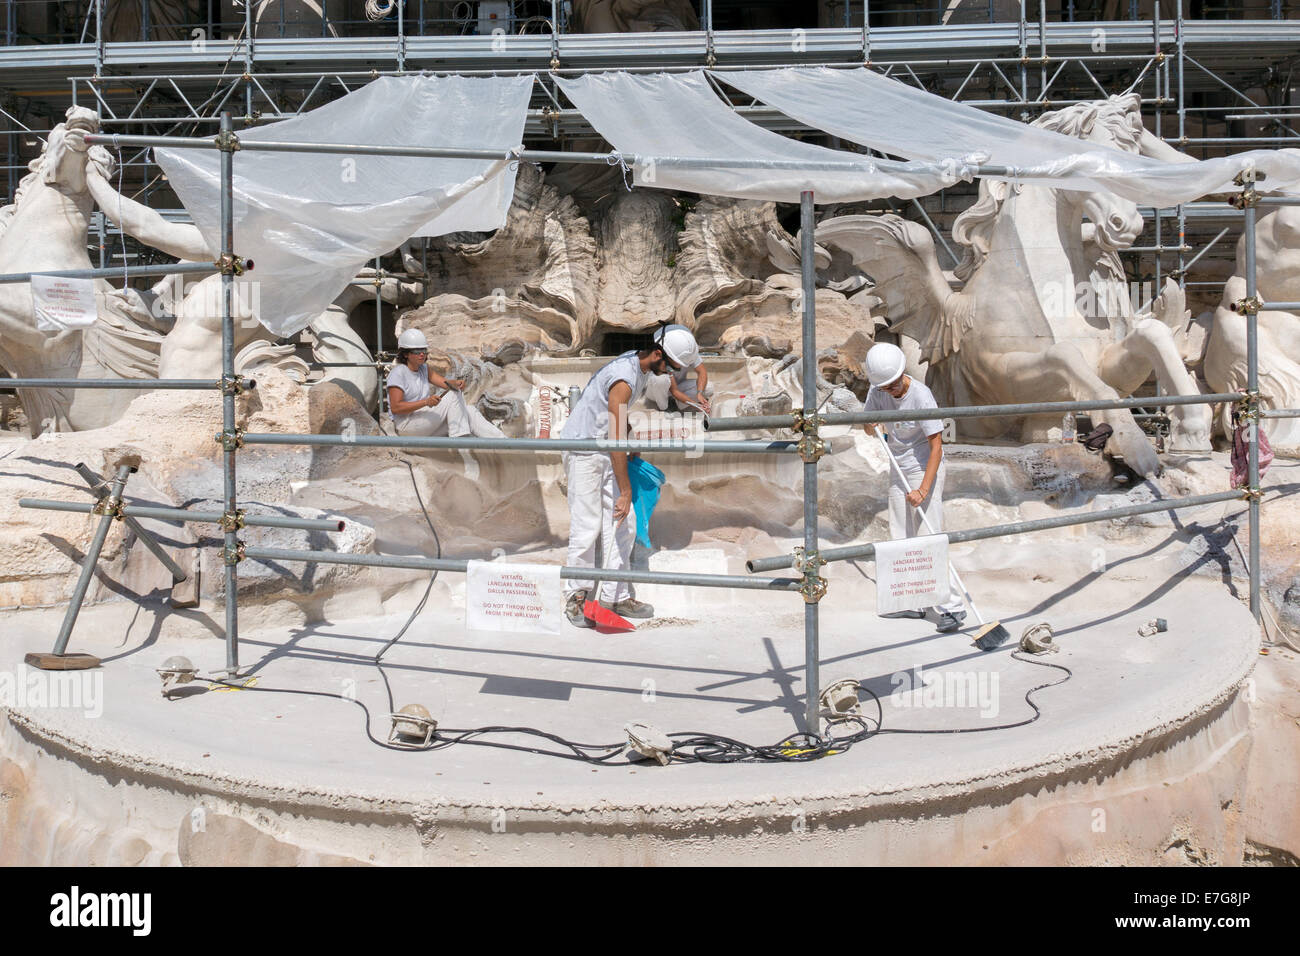 Italy: Restoration work at Trevi Fountain in Rome. Photo from 5th September 2014. Stock Photo